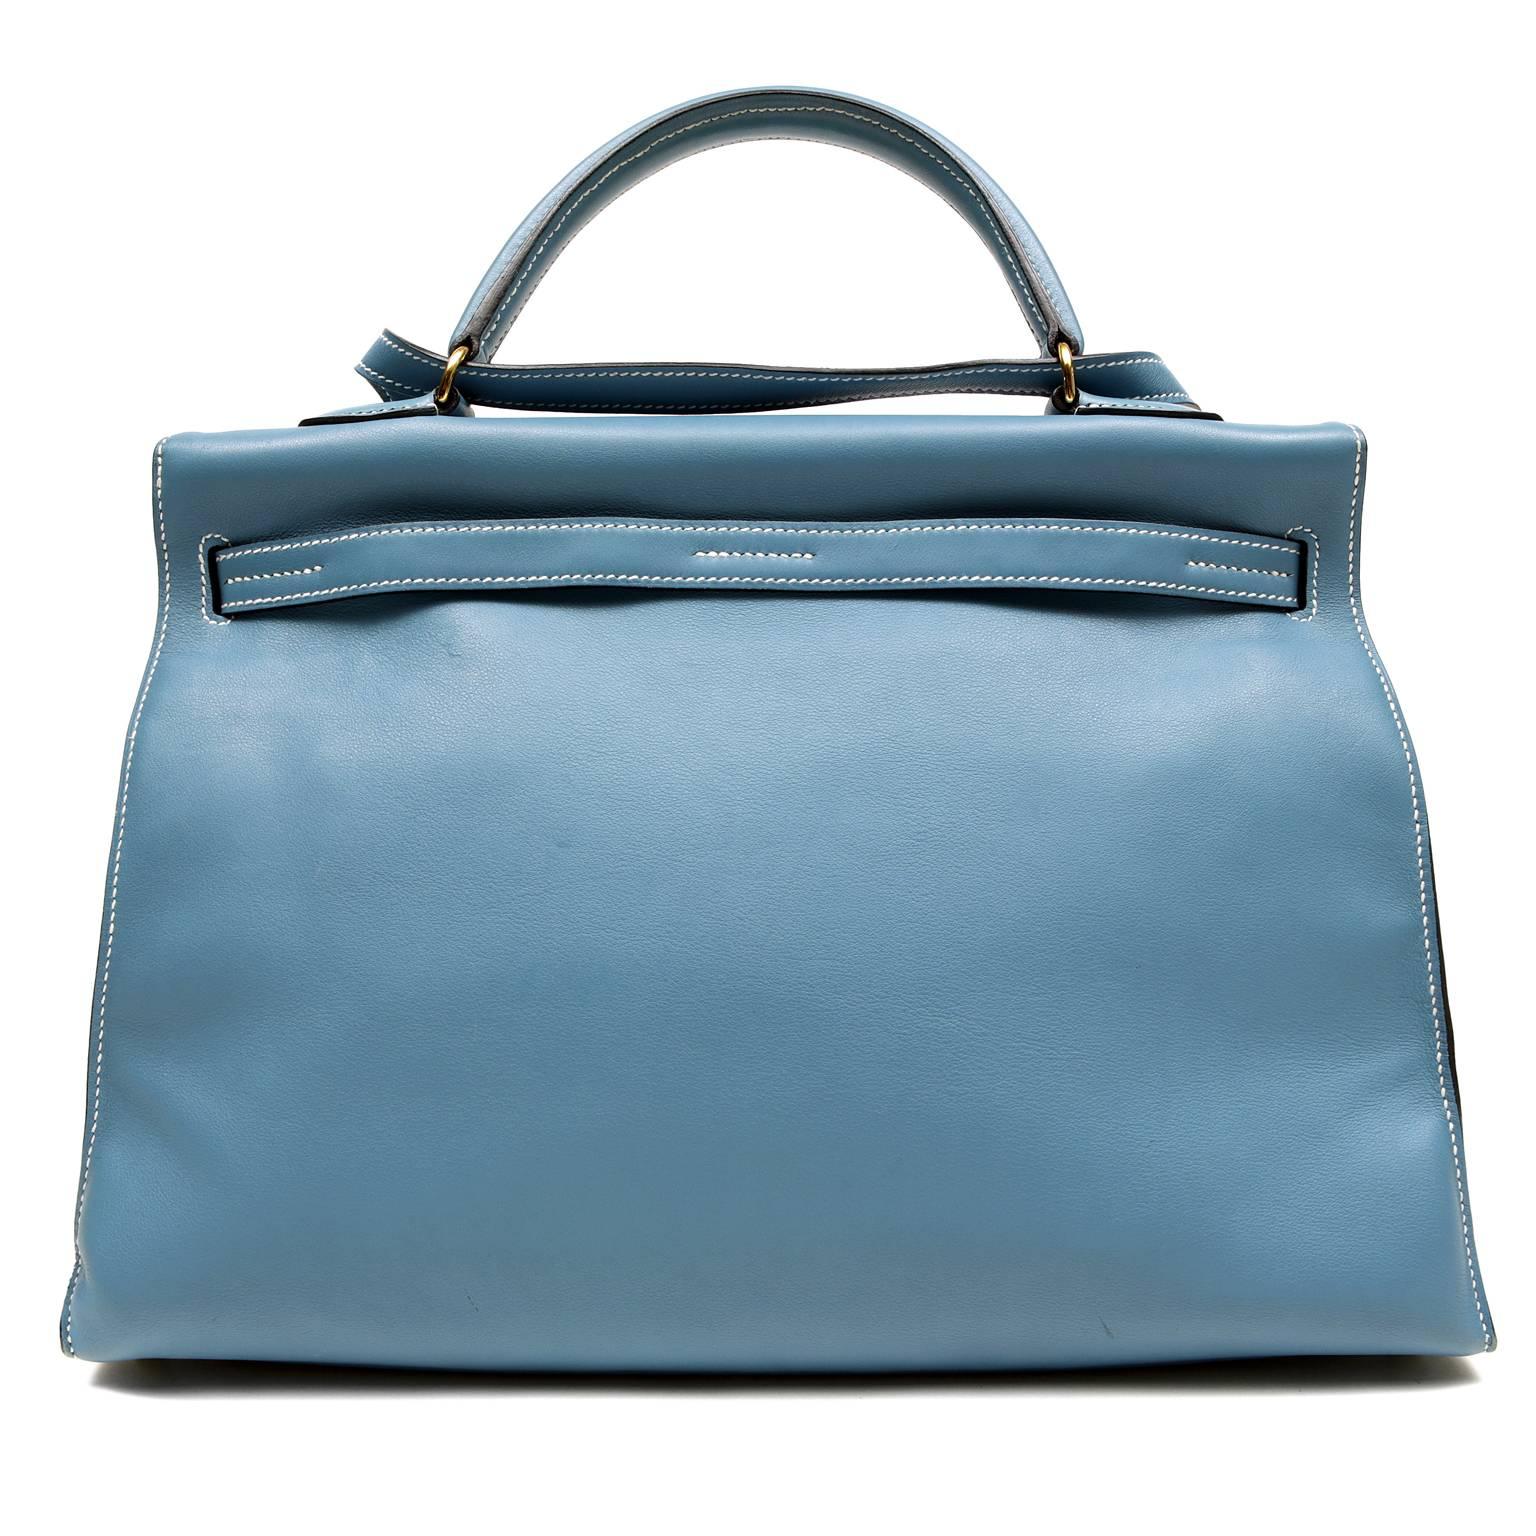 Hermès Blue Jean 35 cm Collapsible Kelly Flat - PRISTINE
Hermès bags are considered the ultimate luxury item worldwide.  Each piece is handcrafted with waitlists that can exceed a year or more.  The demure Kelly style is always in high demand. 